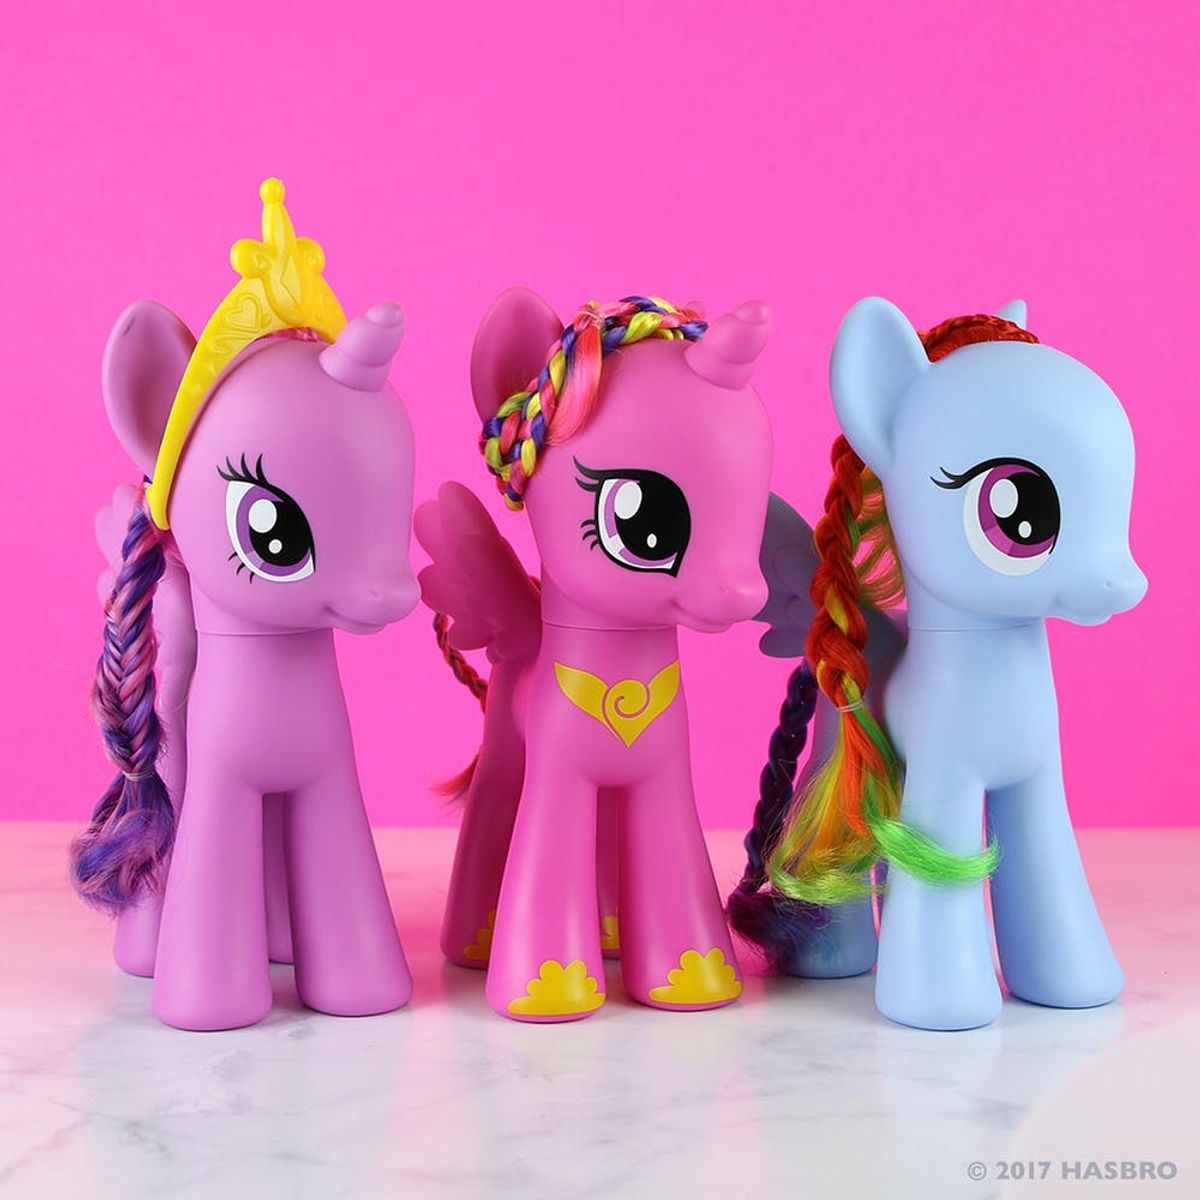 Check Out the New My Little Pony Nail Polish Collab Before It Hits Stores